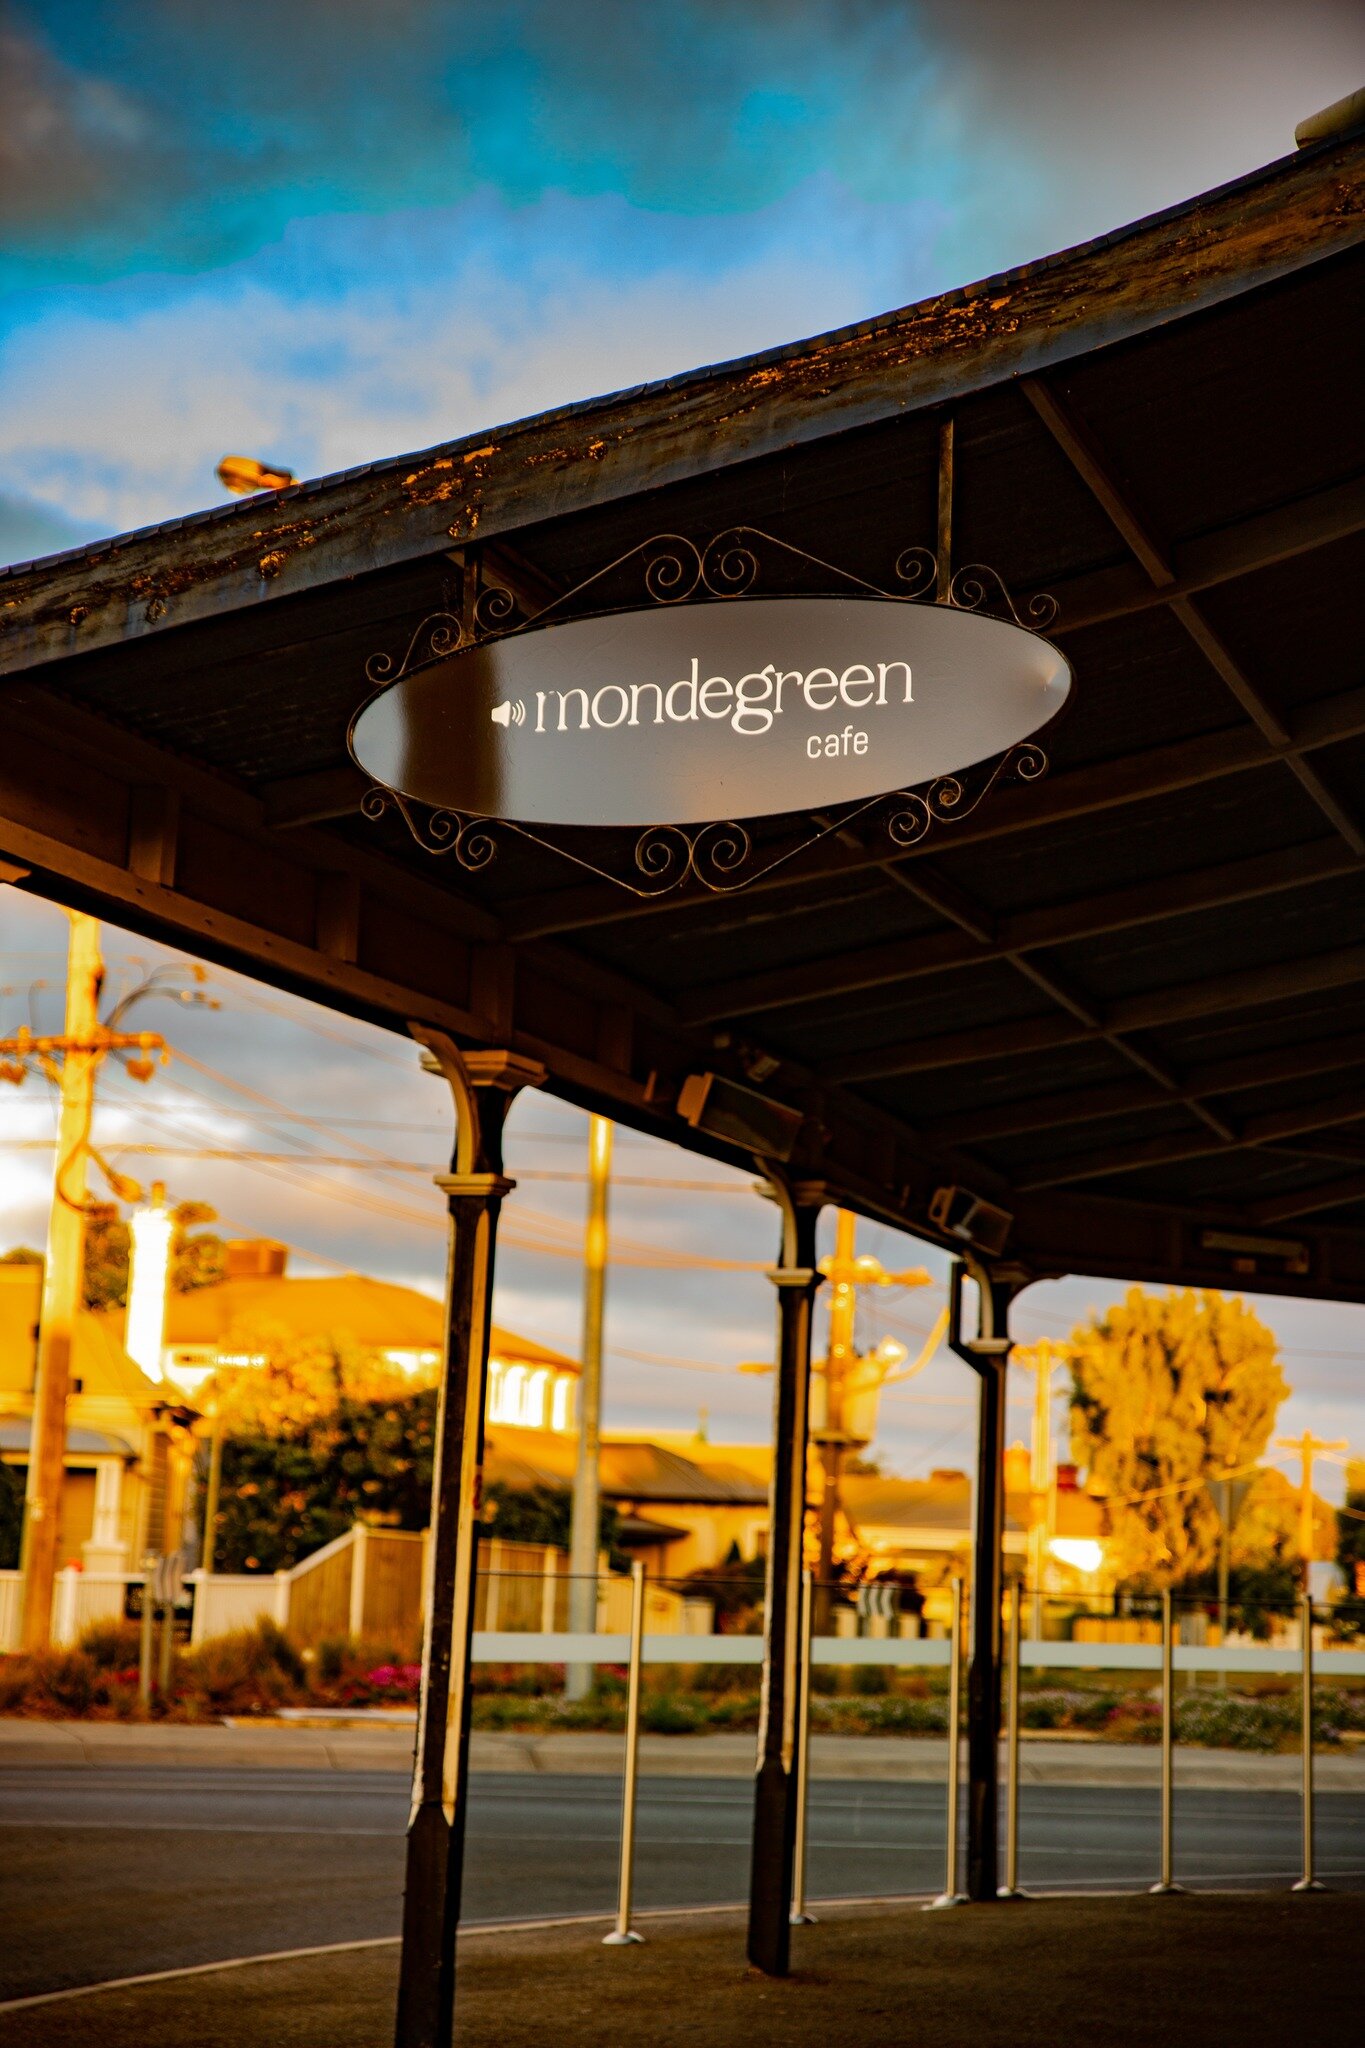 We're open today 8am - 3pm serving our all day Brunch and Lunch!

*Public Holiday surcharges apply

 #food #shoplocalballarat #MondegreenCafe #ballaratbusiness #Smallbusiness #smallbusiness #sevenseedscoffee #publicholiday #publicholidayhours #mondeg